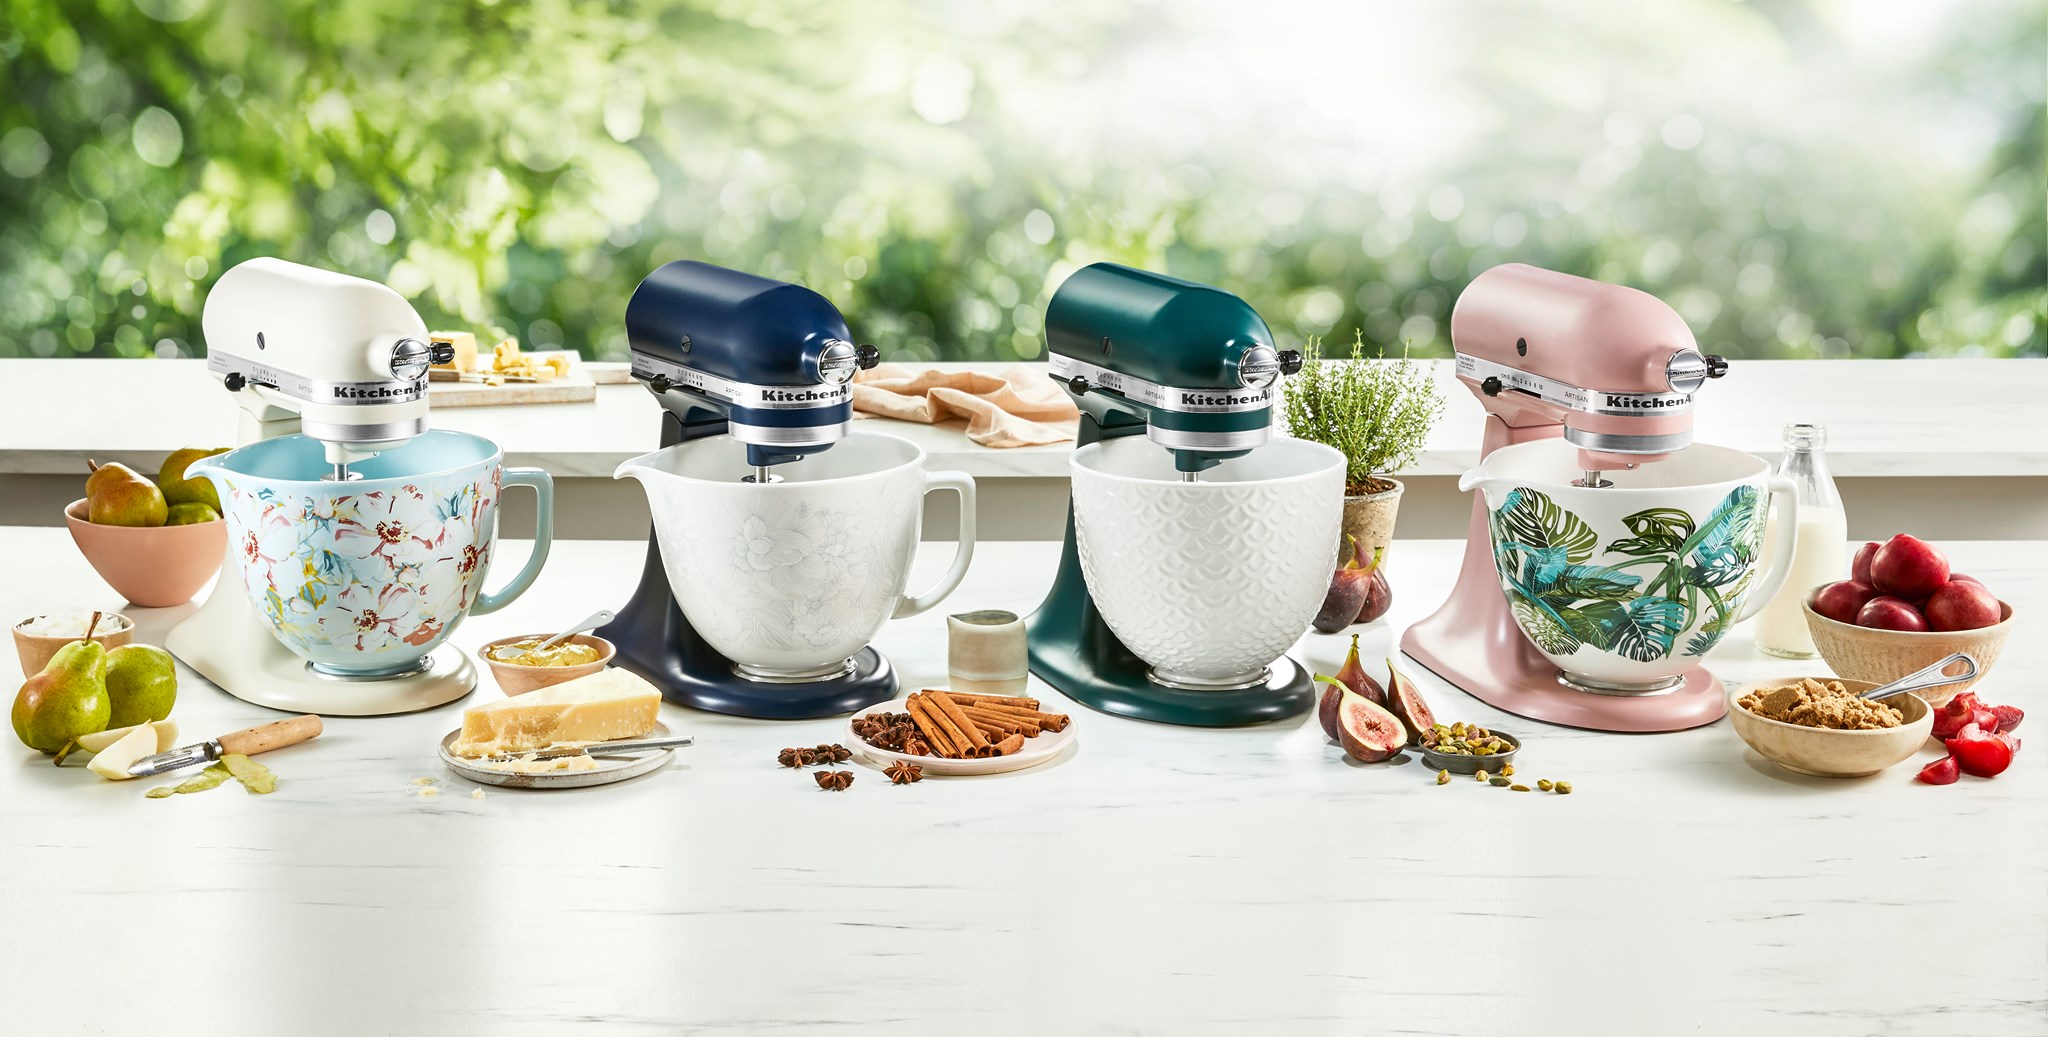 Receive $100 OFF when you purchase a stand mixer and blender bundle